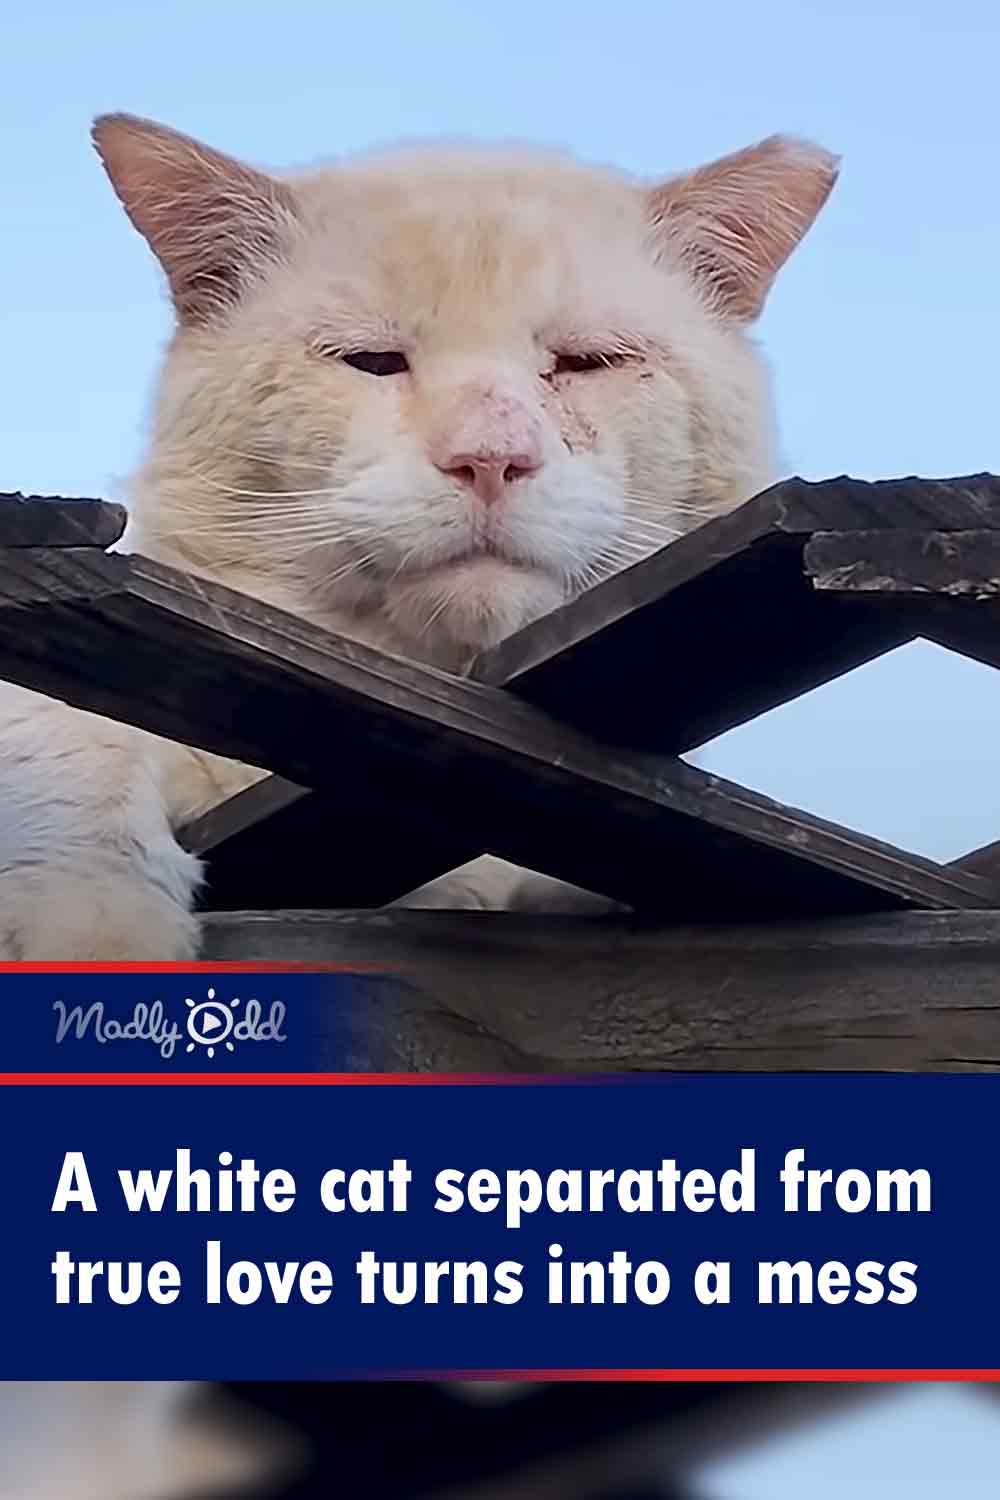 A white cat separated from true love turns into a mess